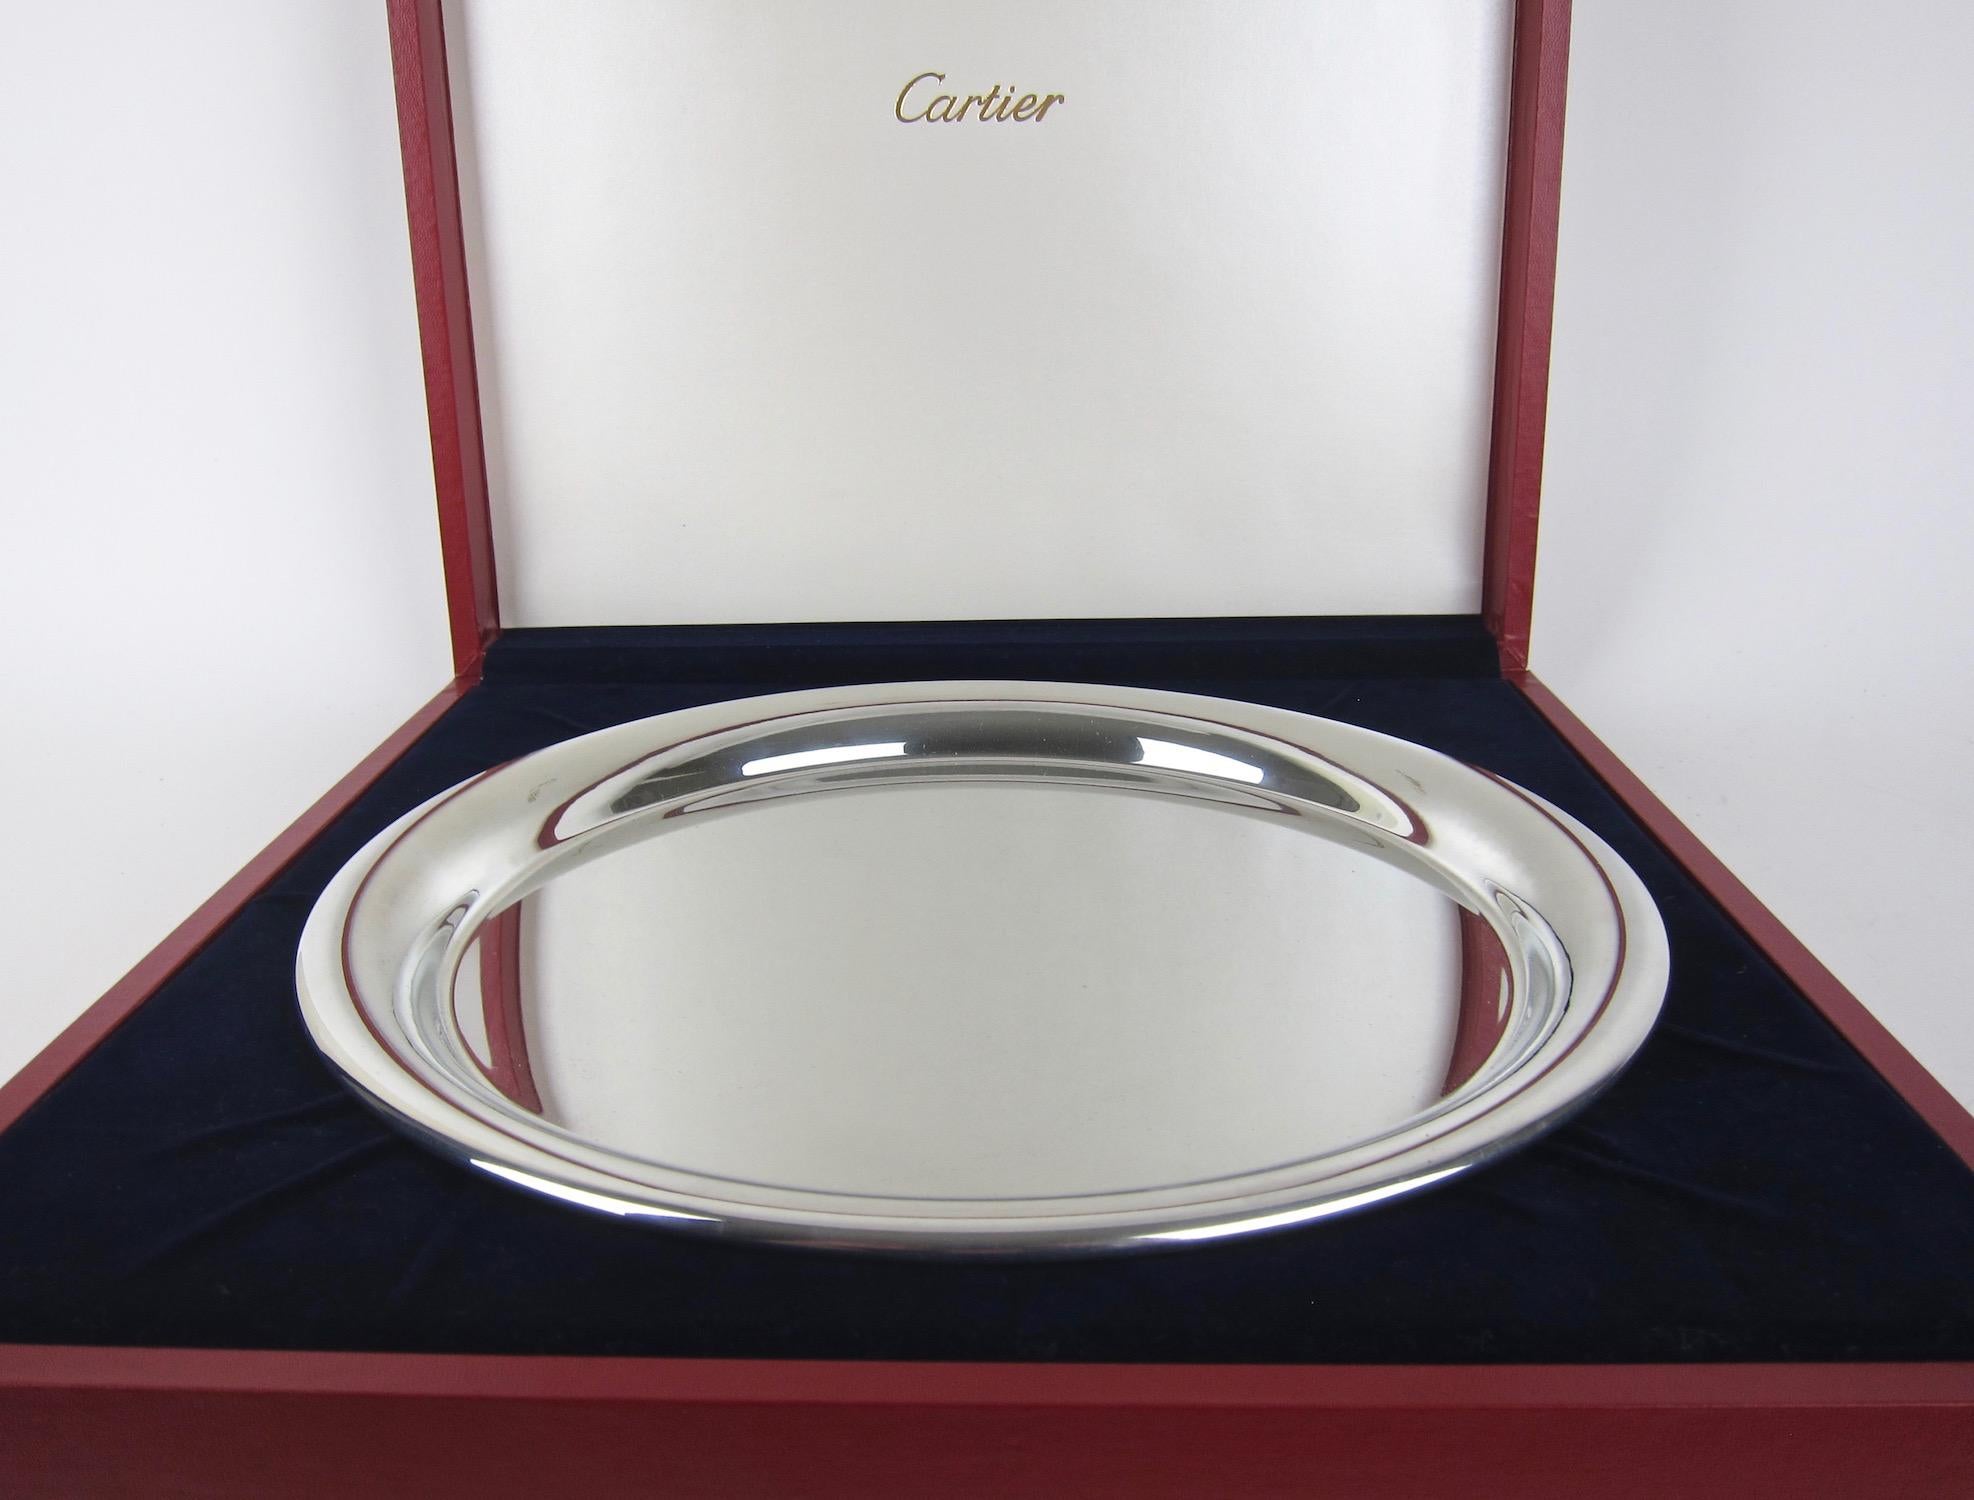 An elegant vintage Cartier serving tray in highly polished pewter, made in France, circa 1977. The round tray has a modern, Minimalist design with a wire-wrapped rim; stamped 